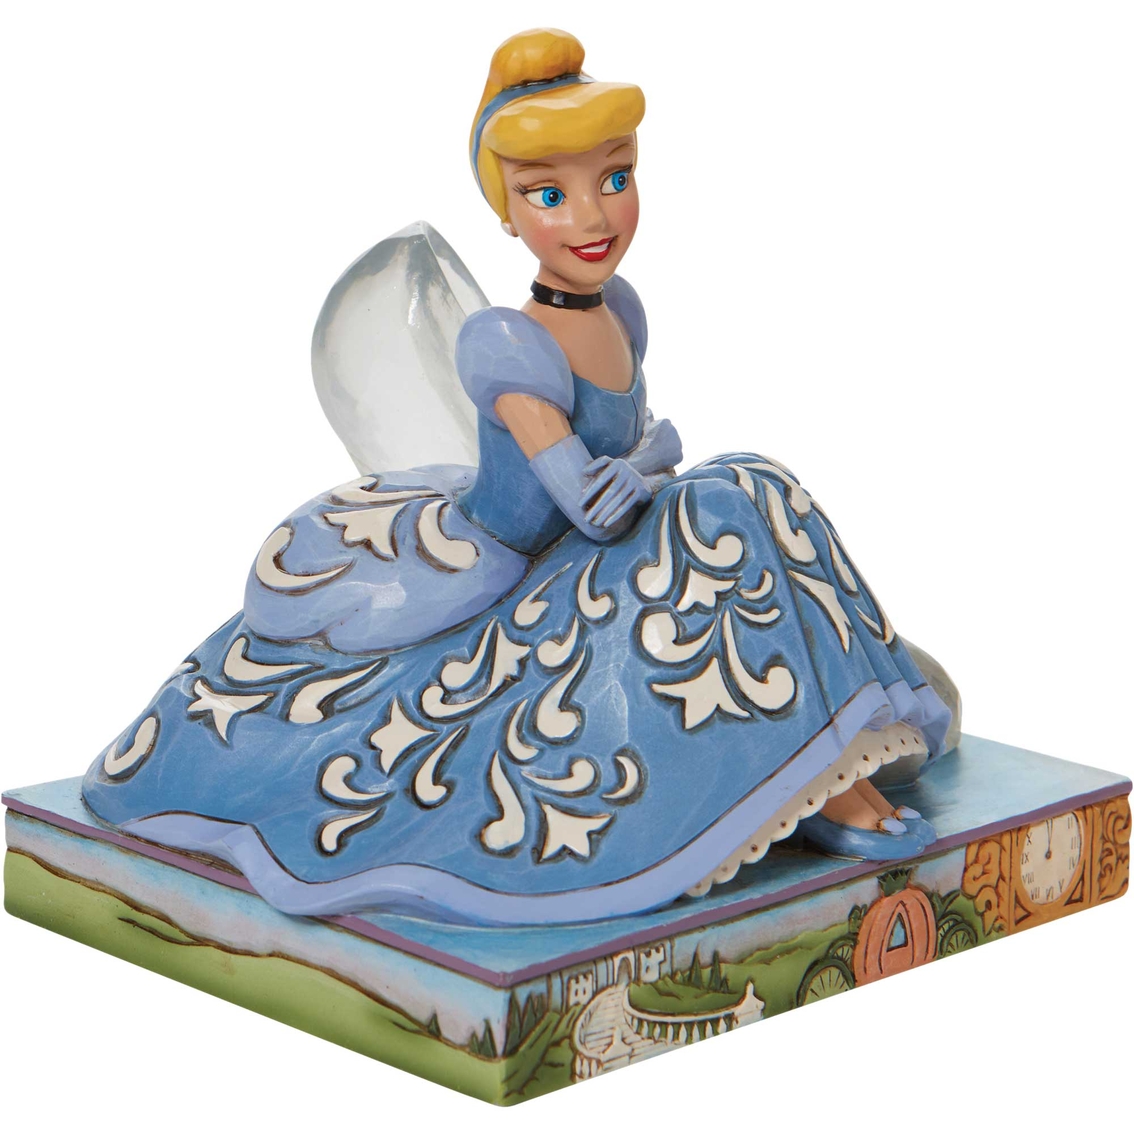 Disney Traditions Cinderella and Glass Slipper - Image 4 of 4